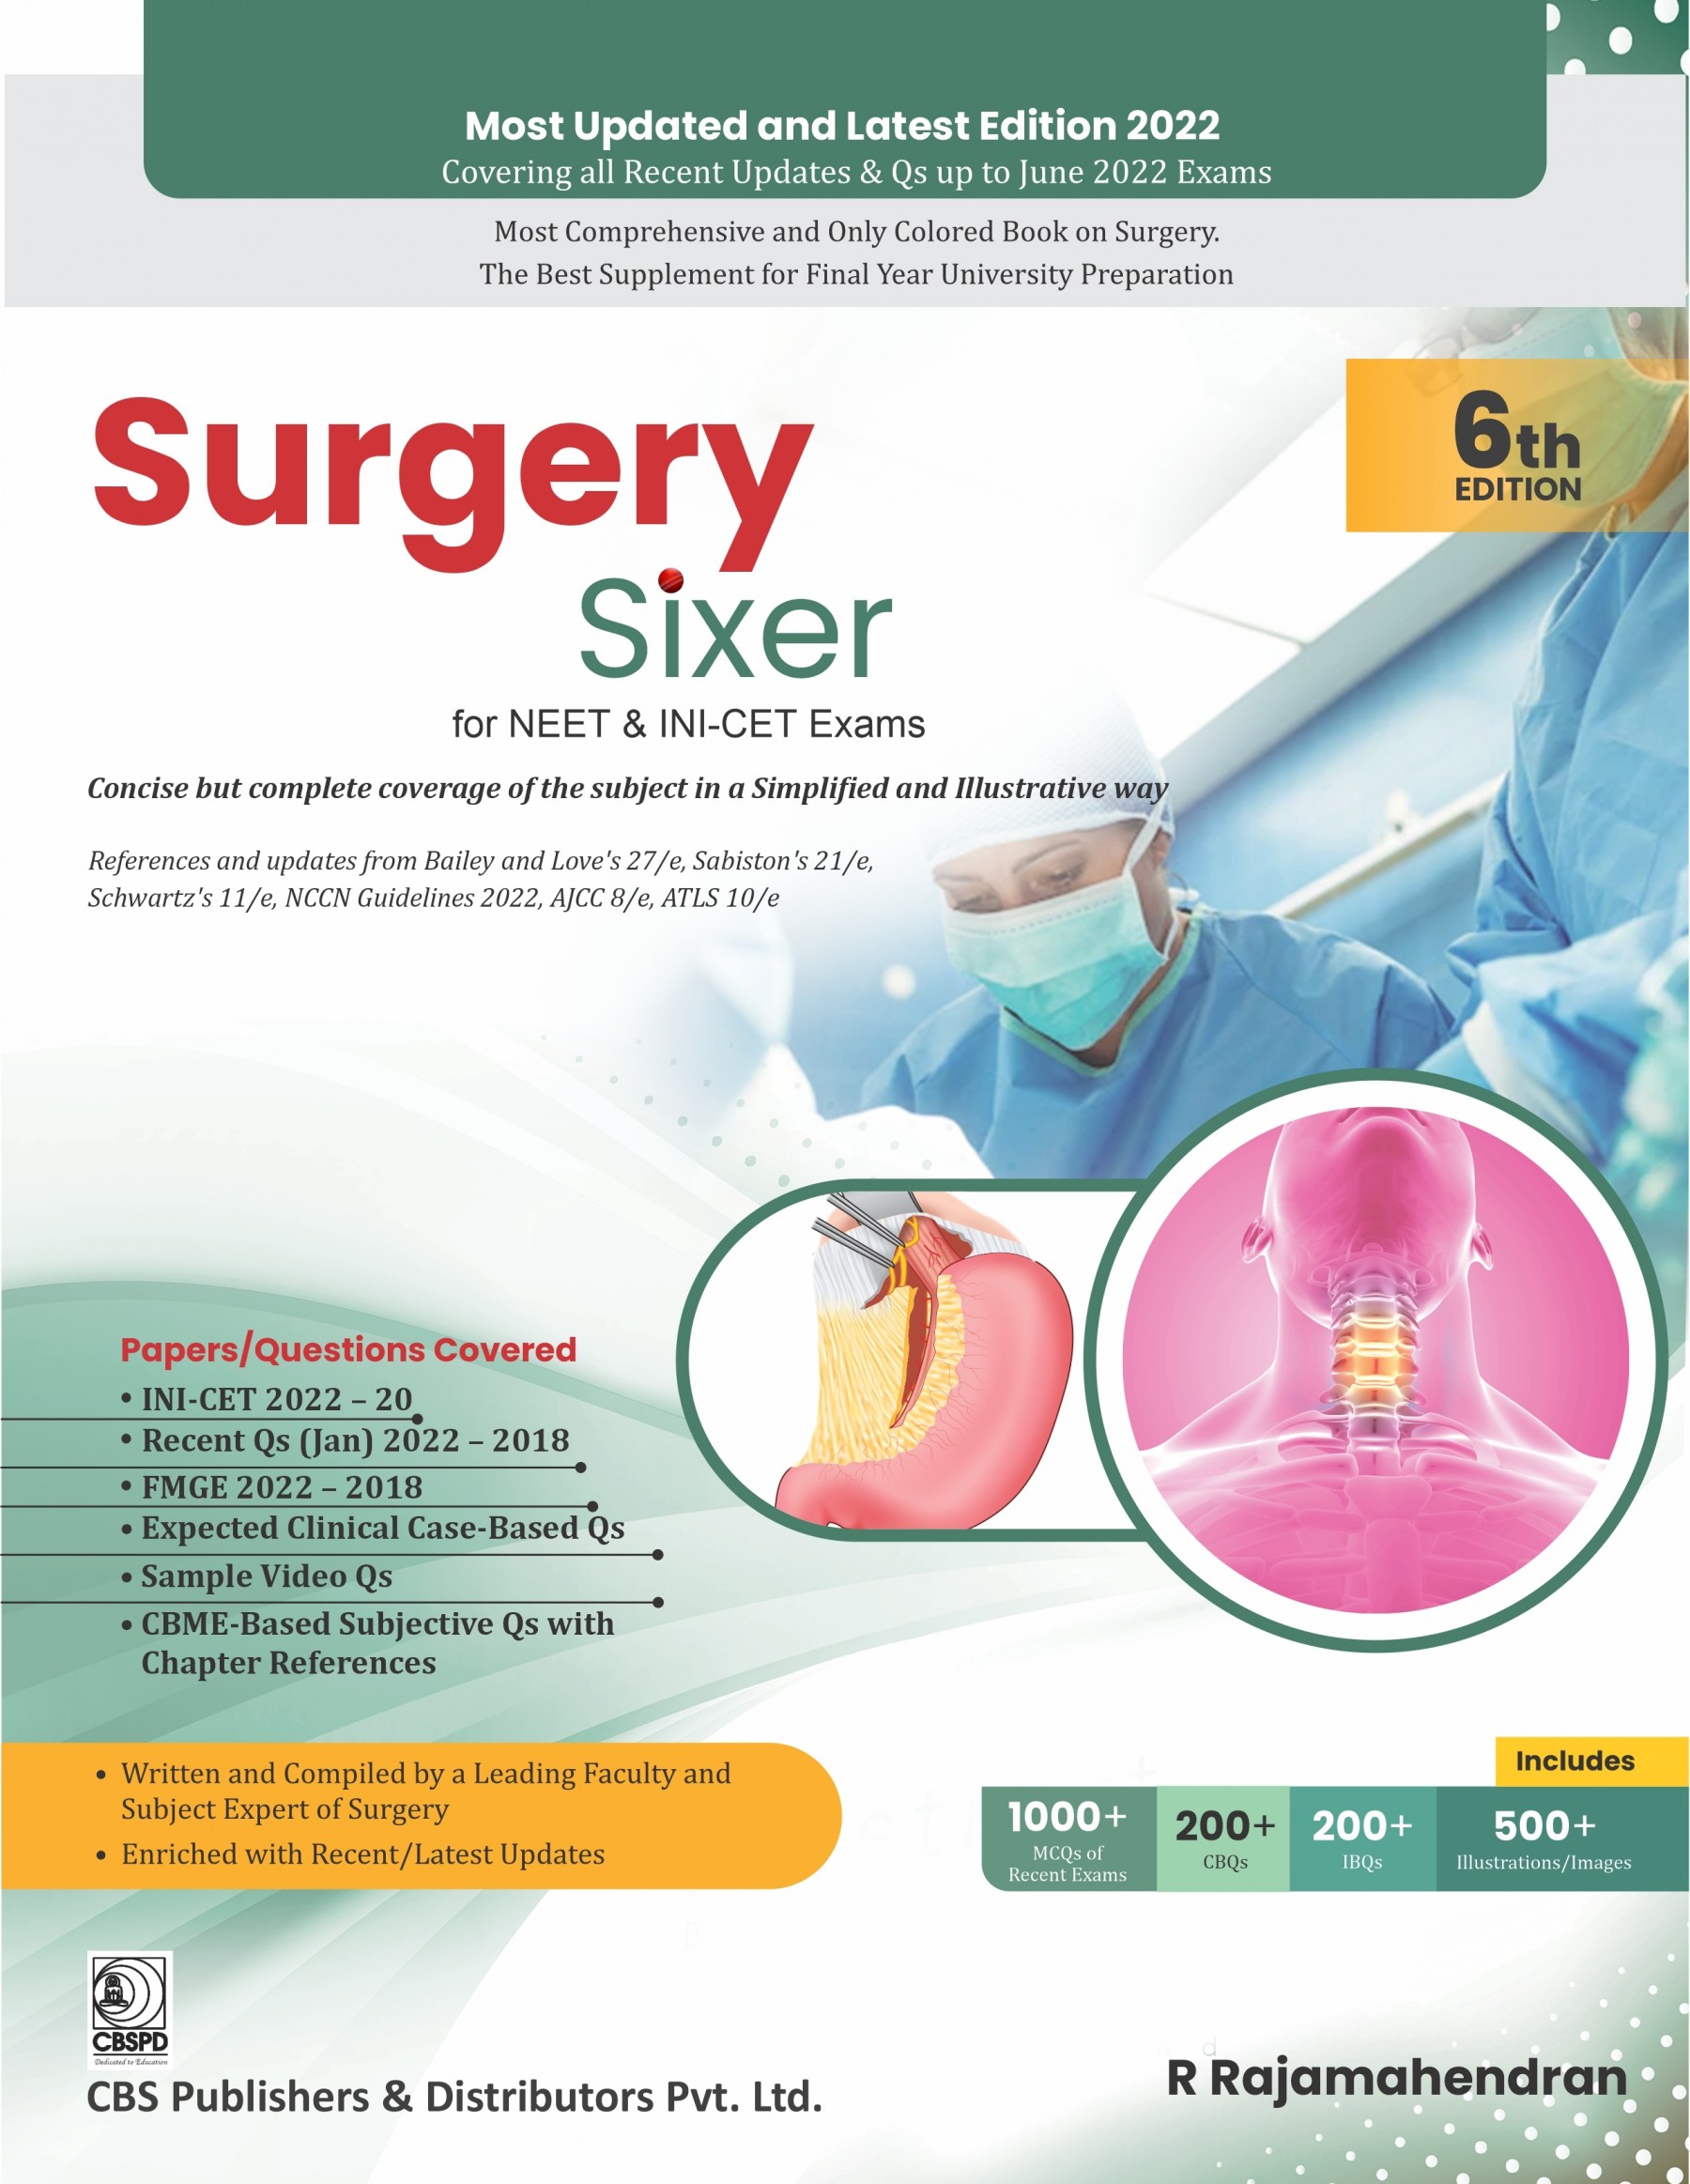 SURGERY SIXER for NEET and INI-CET Exams 6th Edition